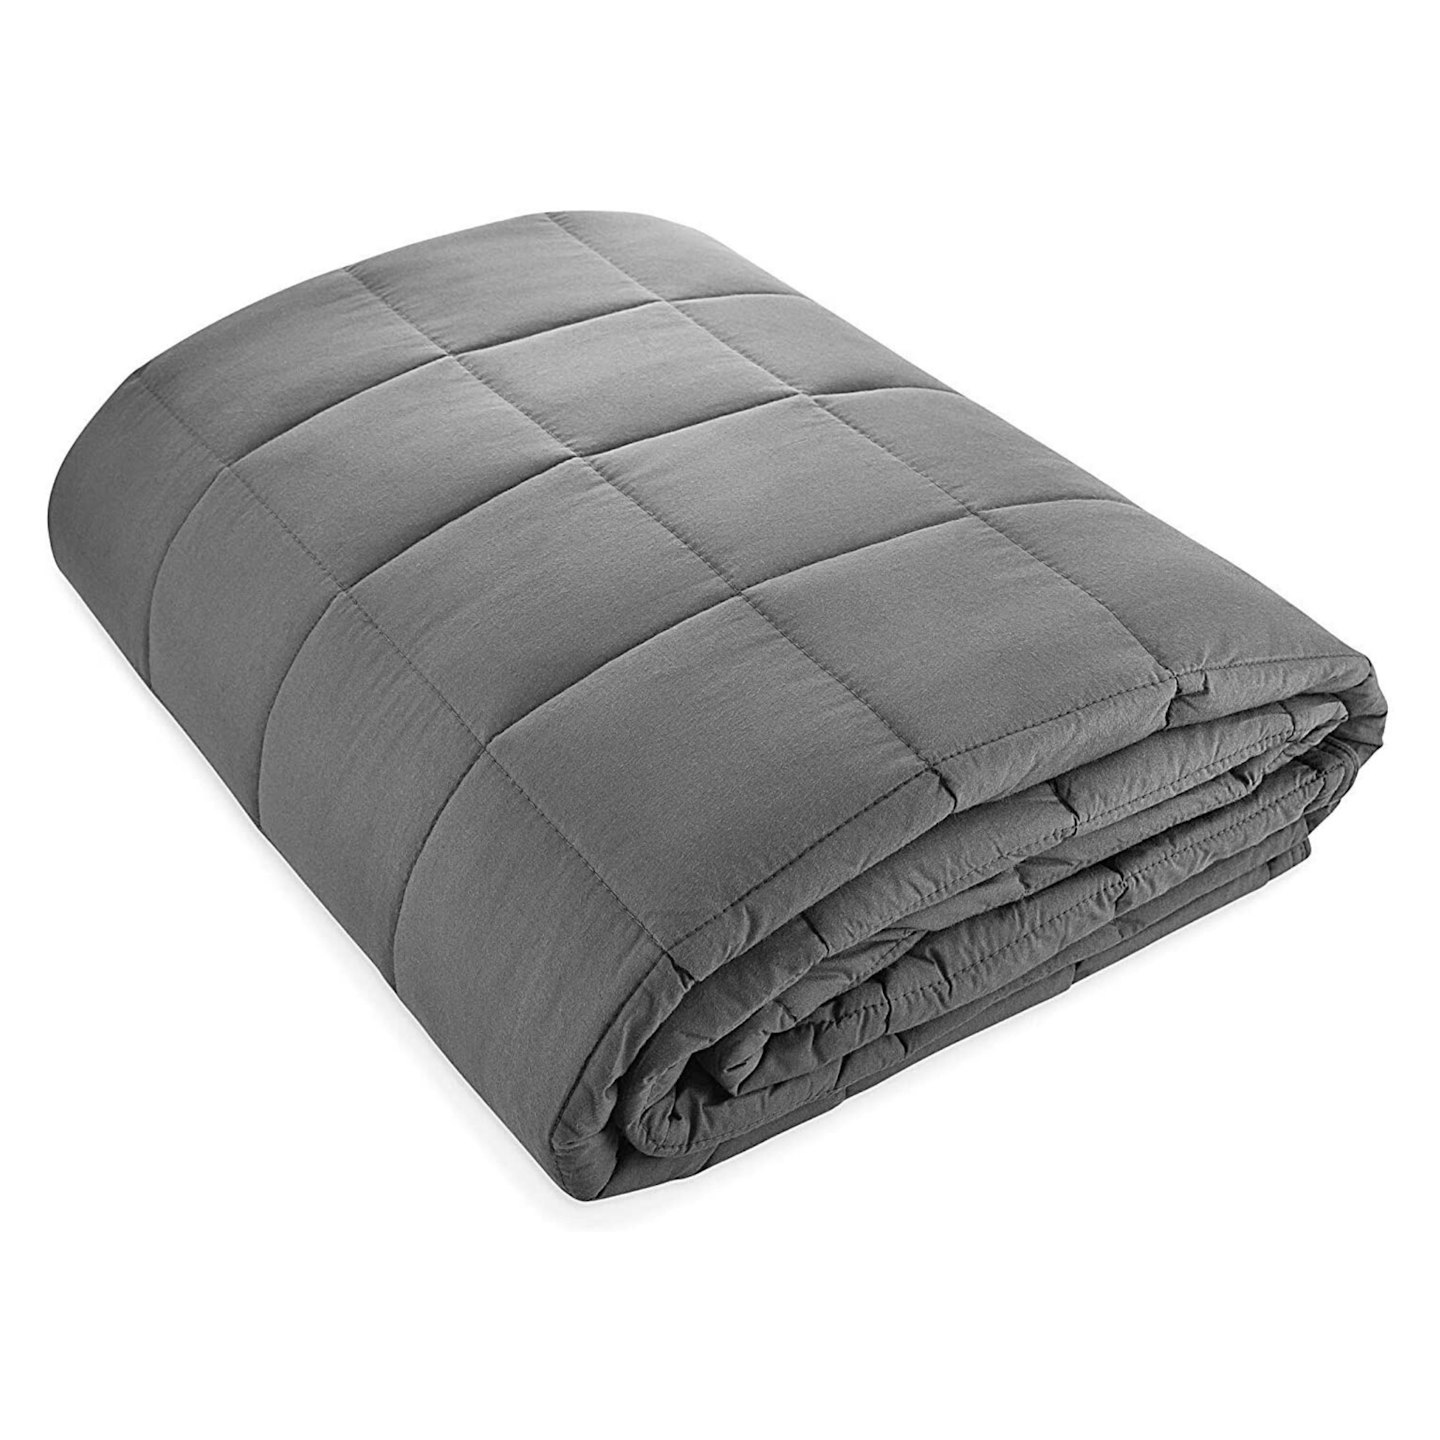 Weighted Blanket For Adults and Kids